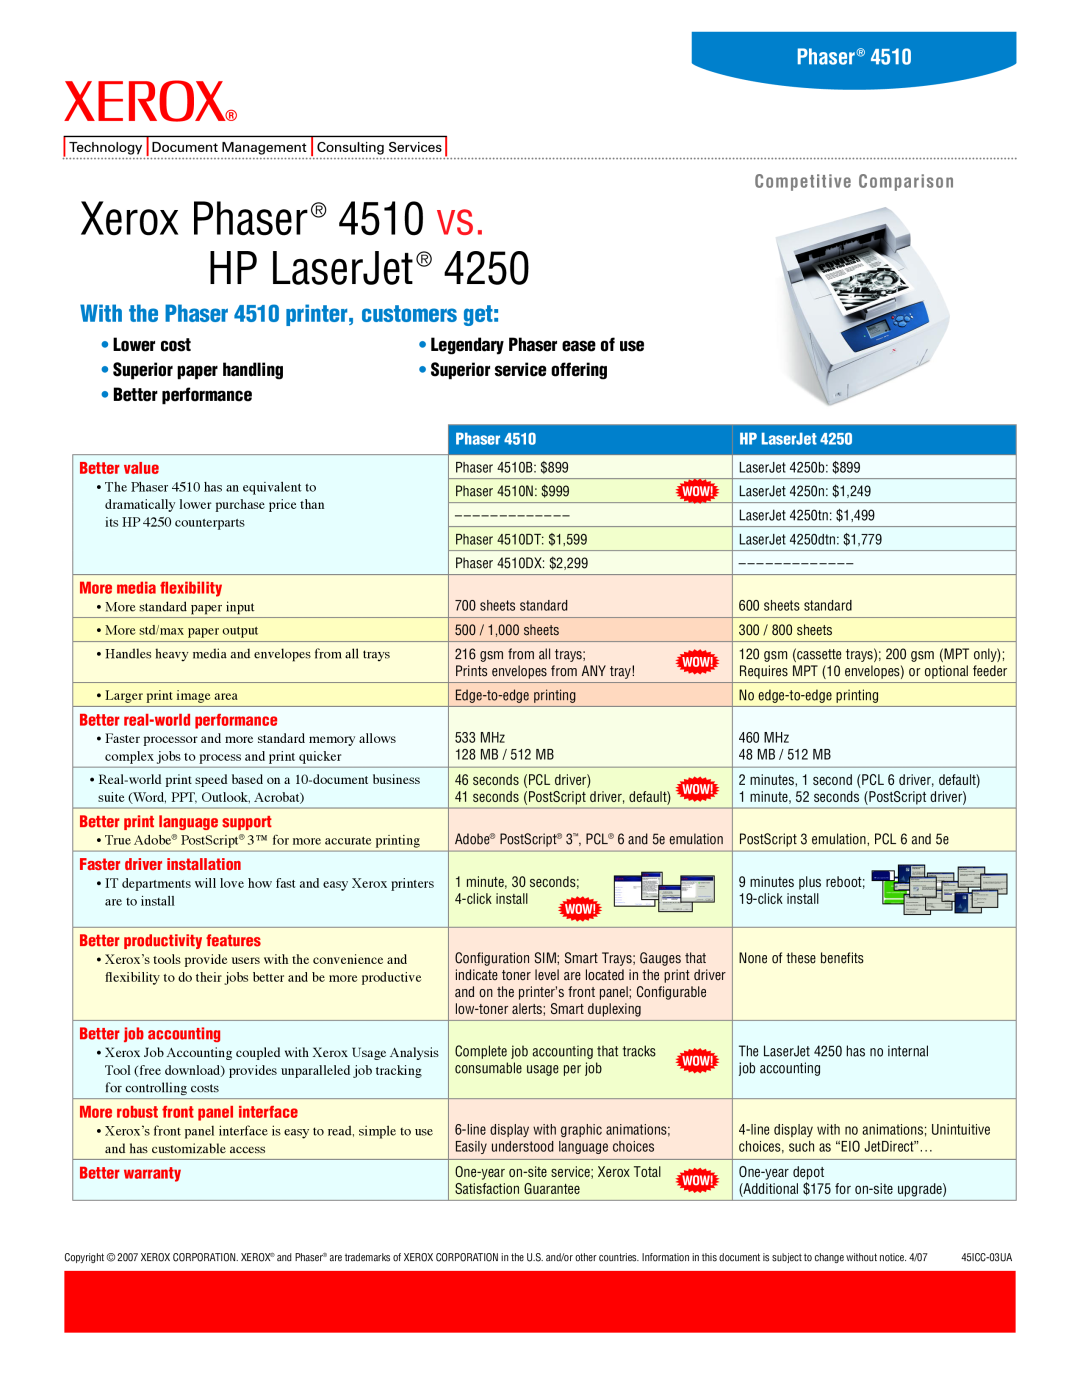 Xerox 4250 warranty Xerox Phaser 4510 vs HP LaserJet, With the Phaser 4510 printer, customers get, Competitive Comparison 